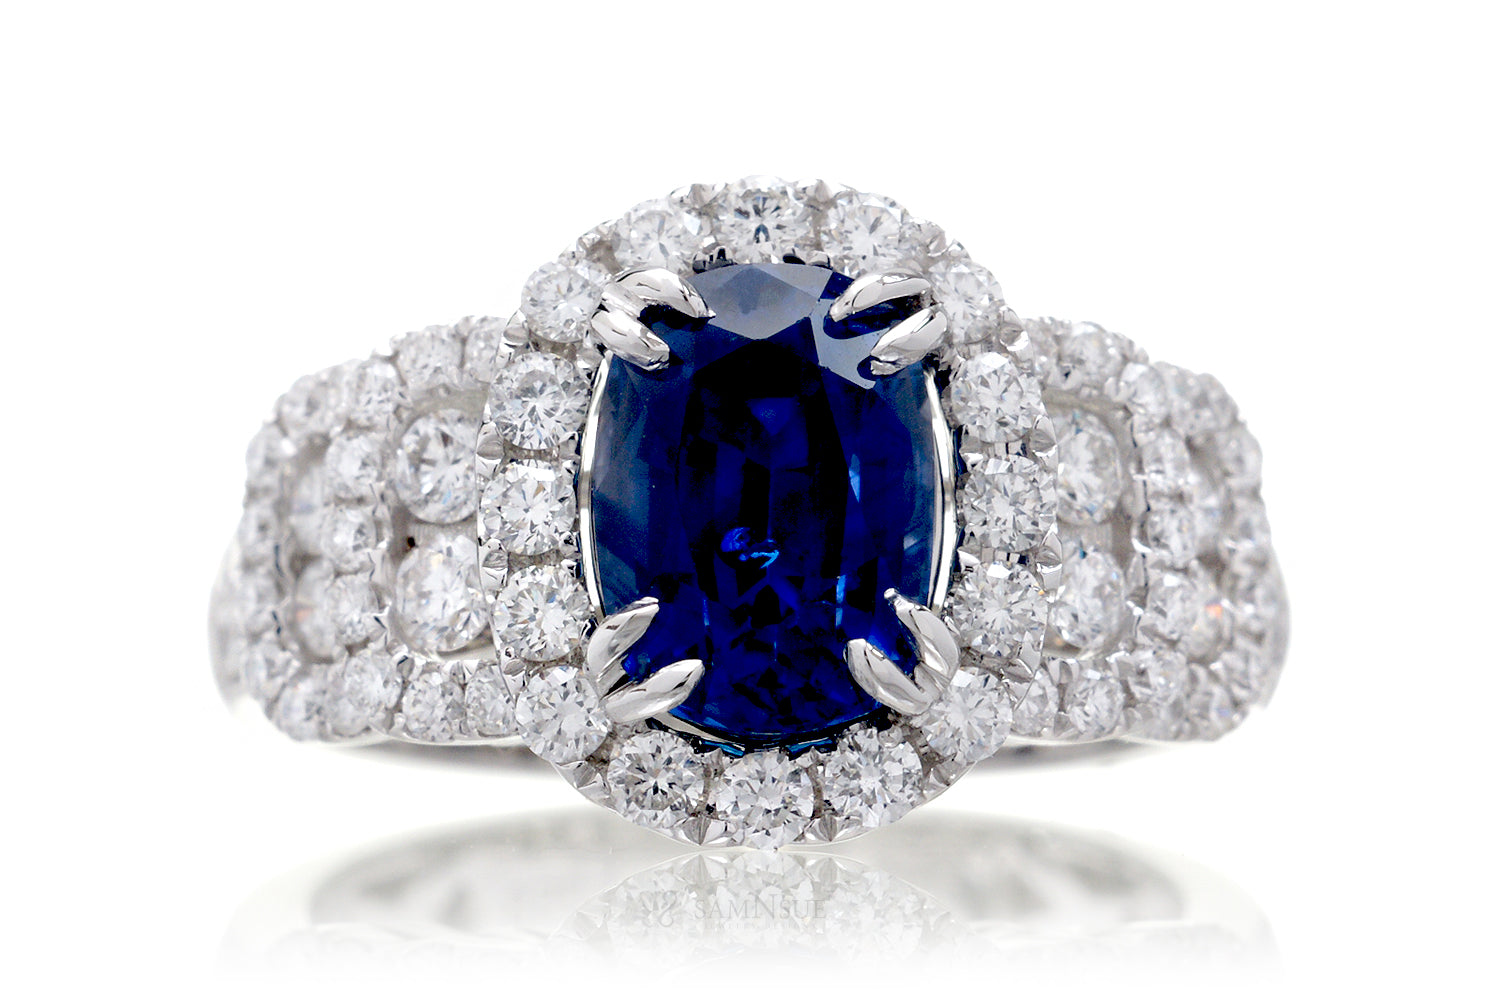 The Thelma Oval Sapphire Ring